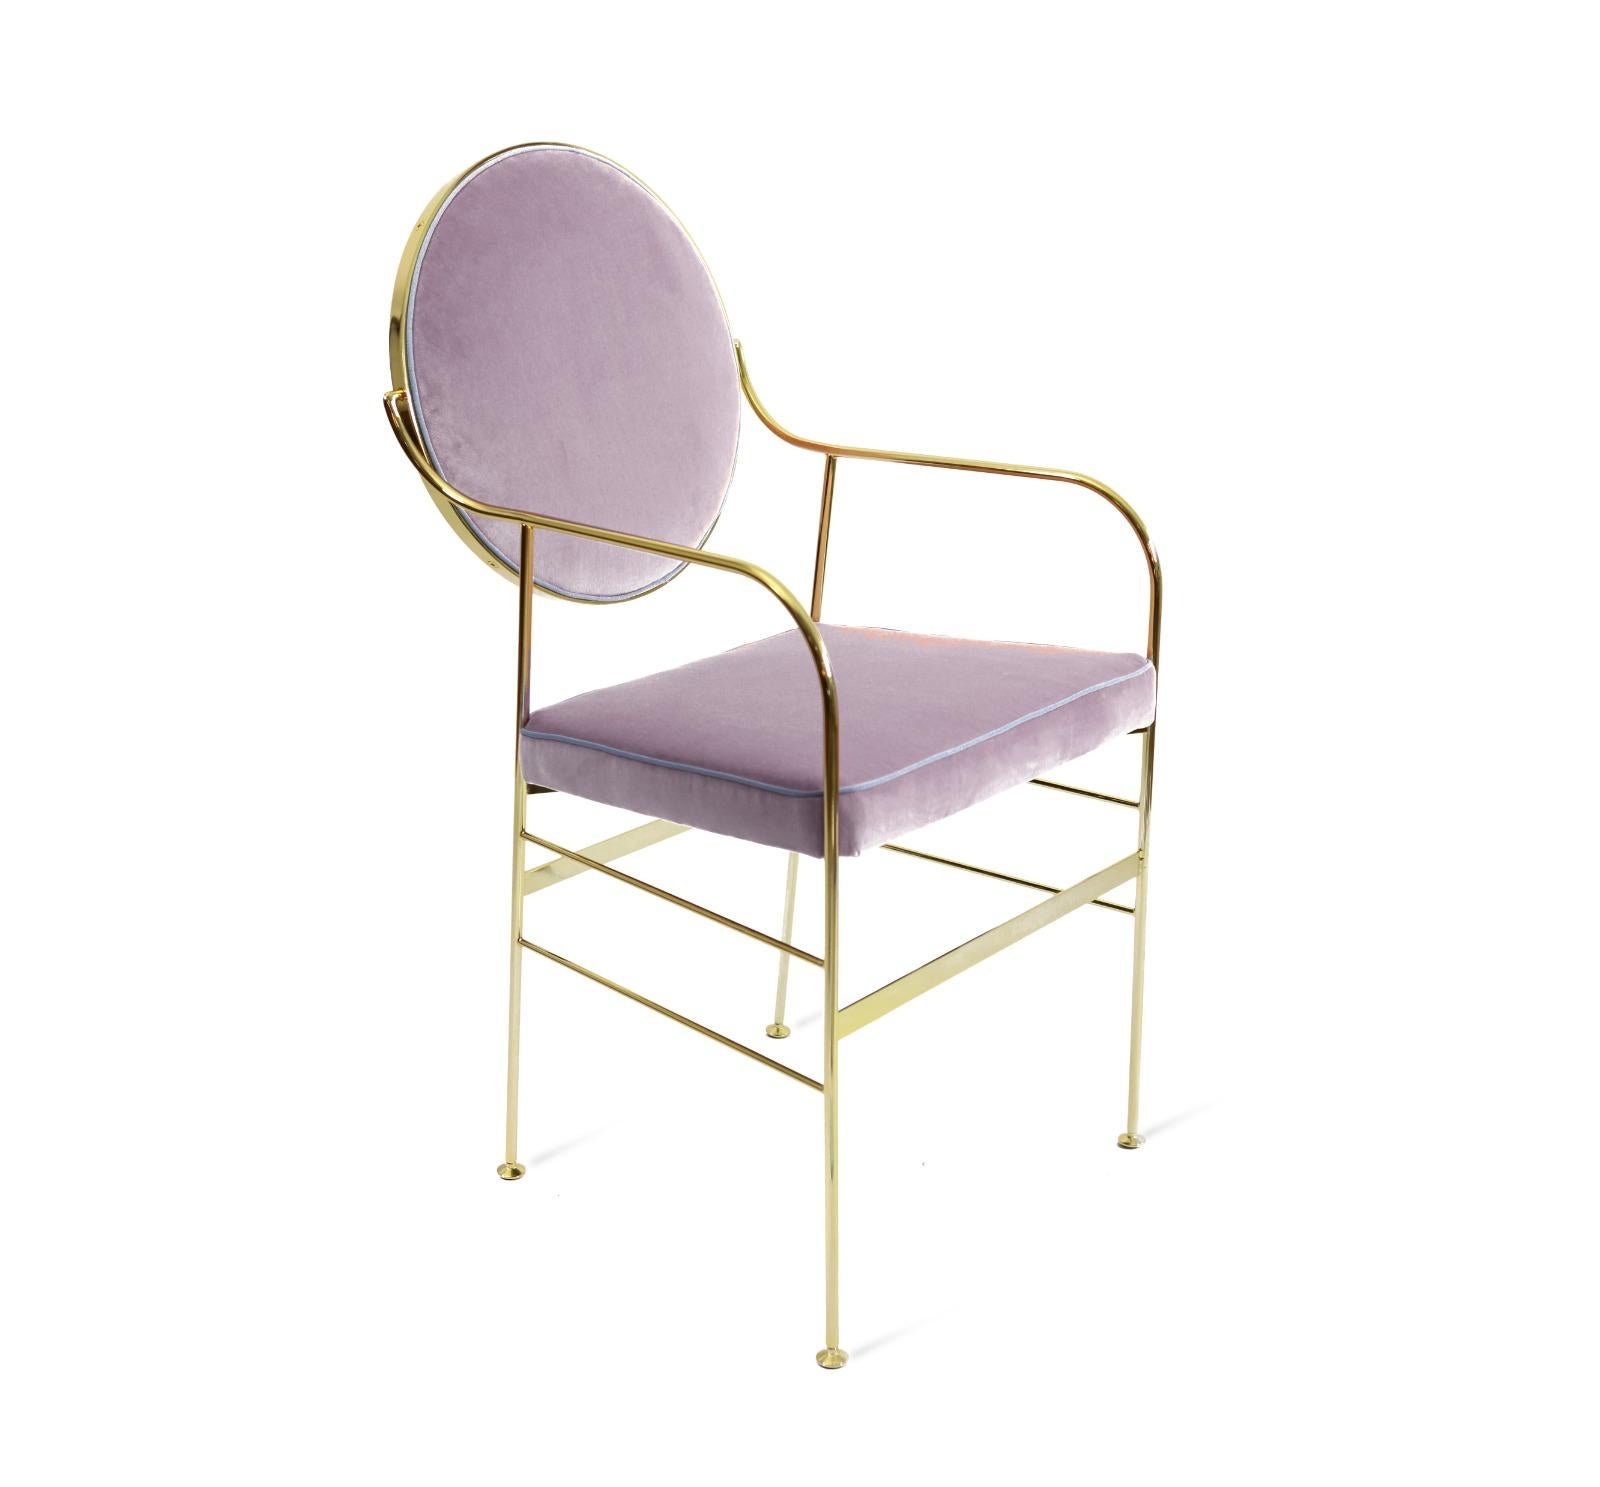 This striking chair has an iron structure covered with a 24-karat gold flash plating, and elegant galvanized brass feet. The back cushions (which move to achieve the perfect orientation) and the seat are covered in velvet PL stain resistant .